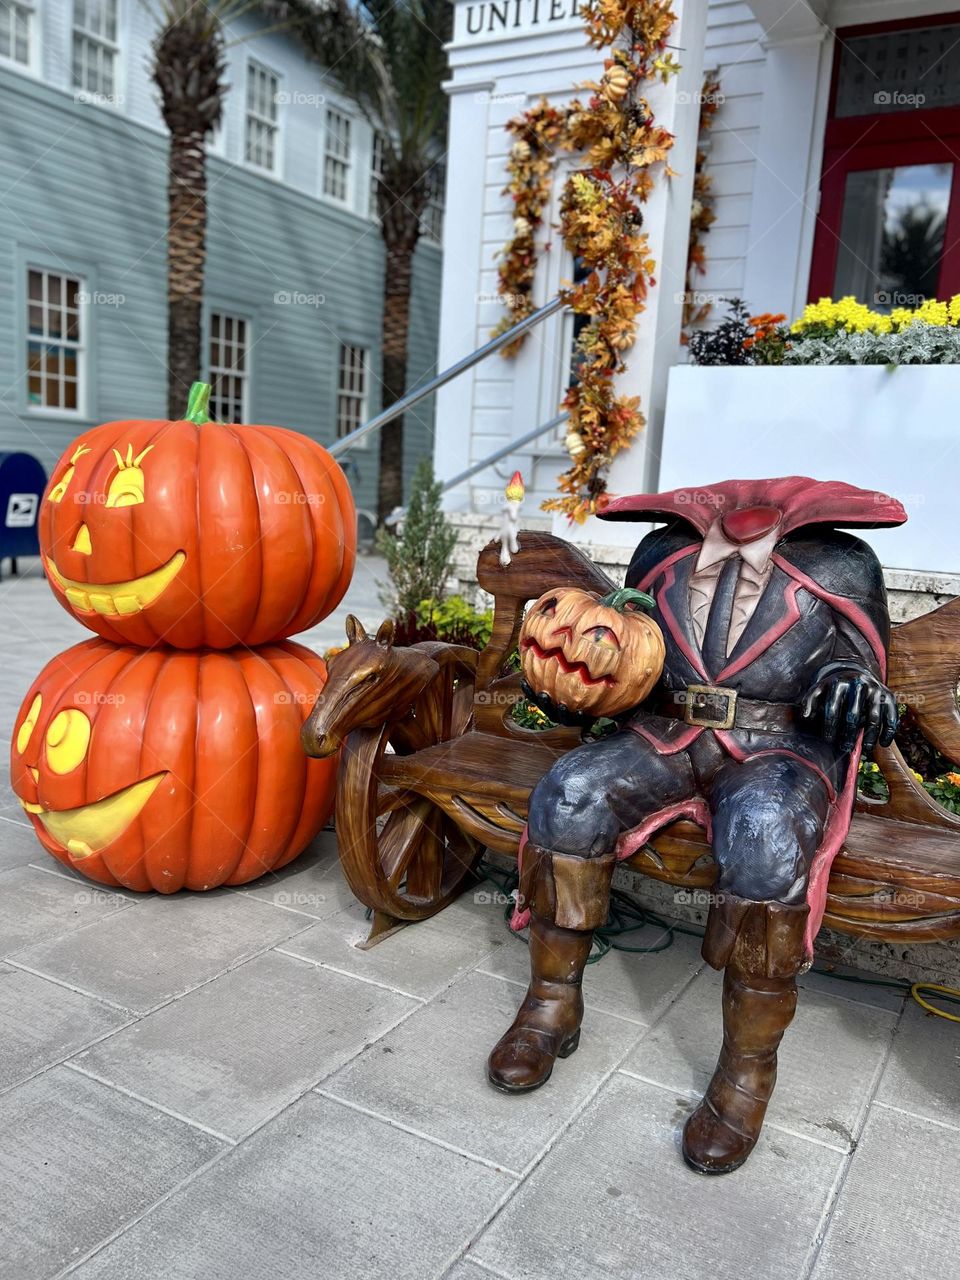 Halloween display of the Headless Horseman sitting on a bench outside a town post office